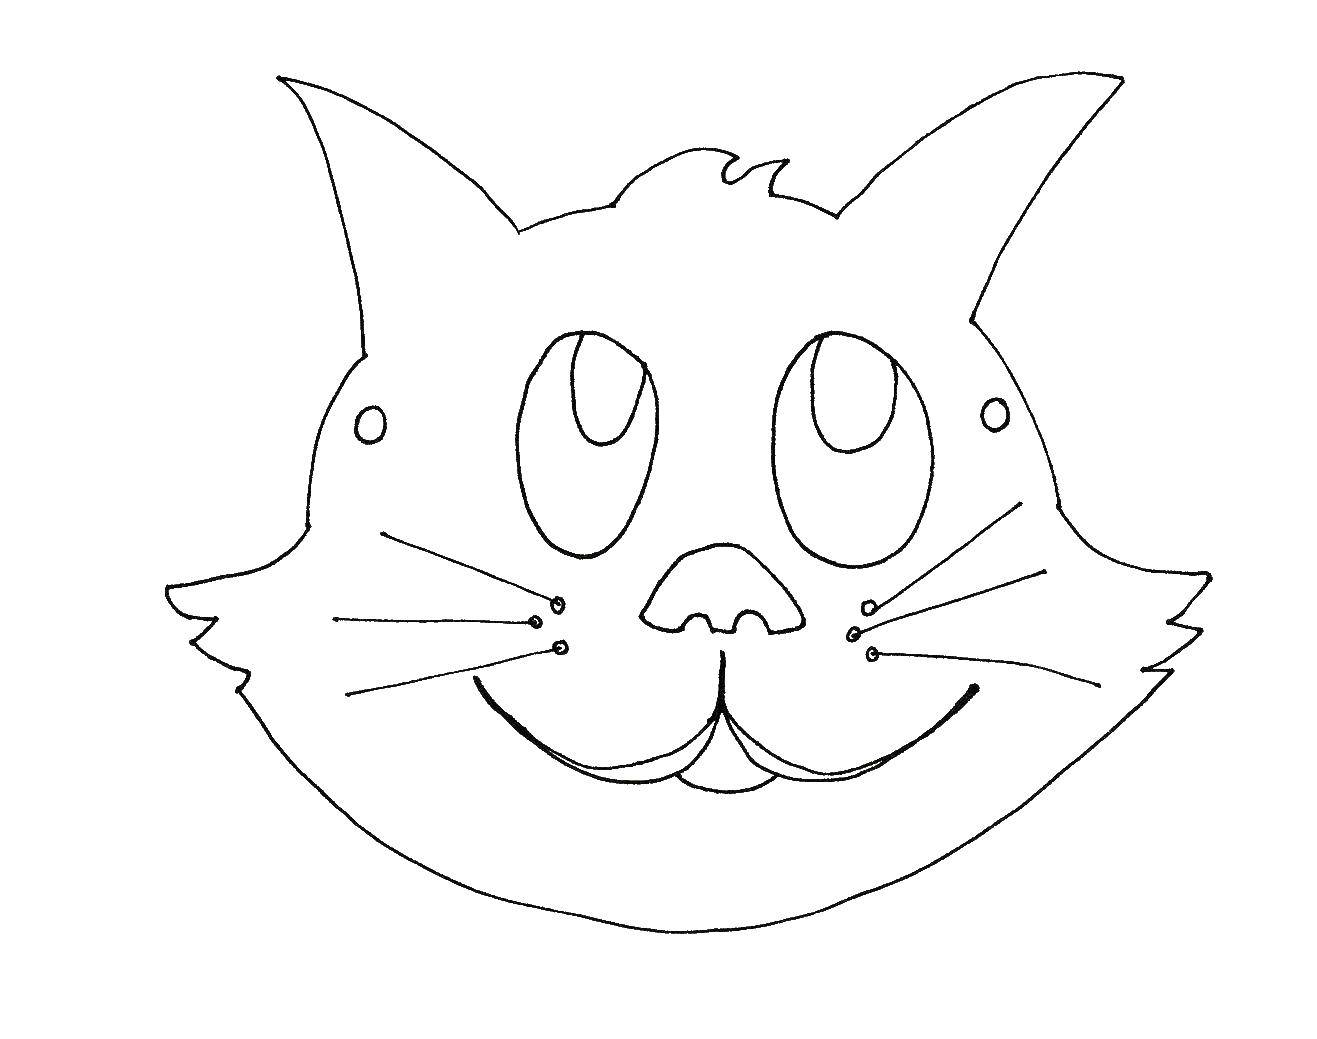 Coloring Cat mask. Category Masks . Tags:  mask, cat.